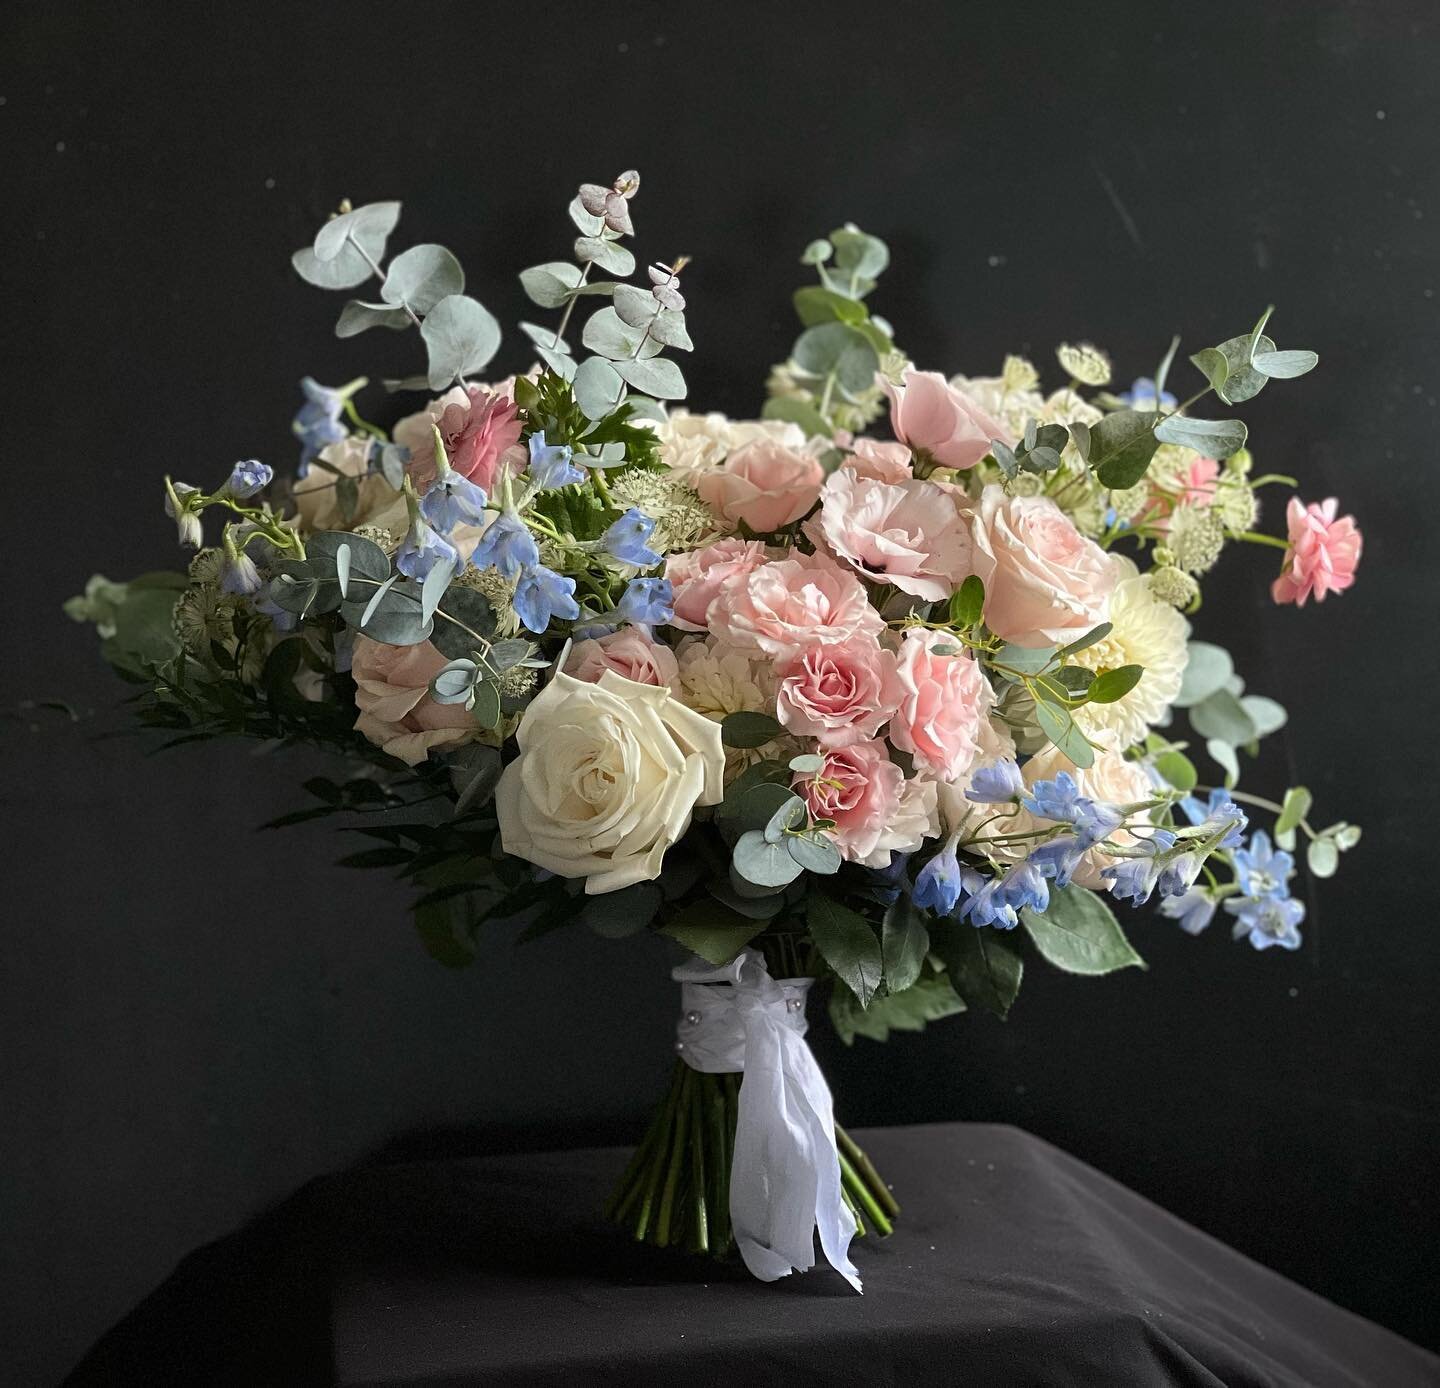 A dreamy bridal bouquet for Samantha - french blue delphinium just make everything better.  Local flowers and foliages in this bouquet are lisianthus, dahlias, eucalyptus, asters and a few of those aforementioned delph. We planted a whole bed of thes